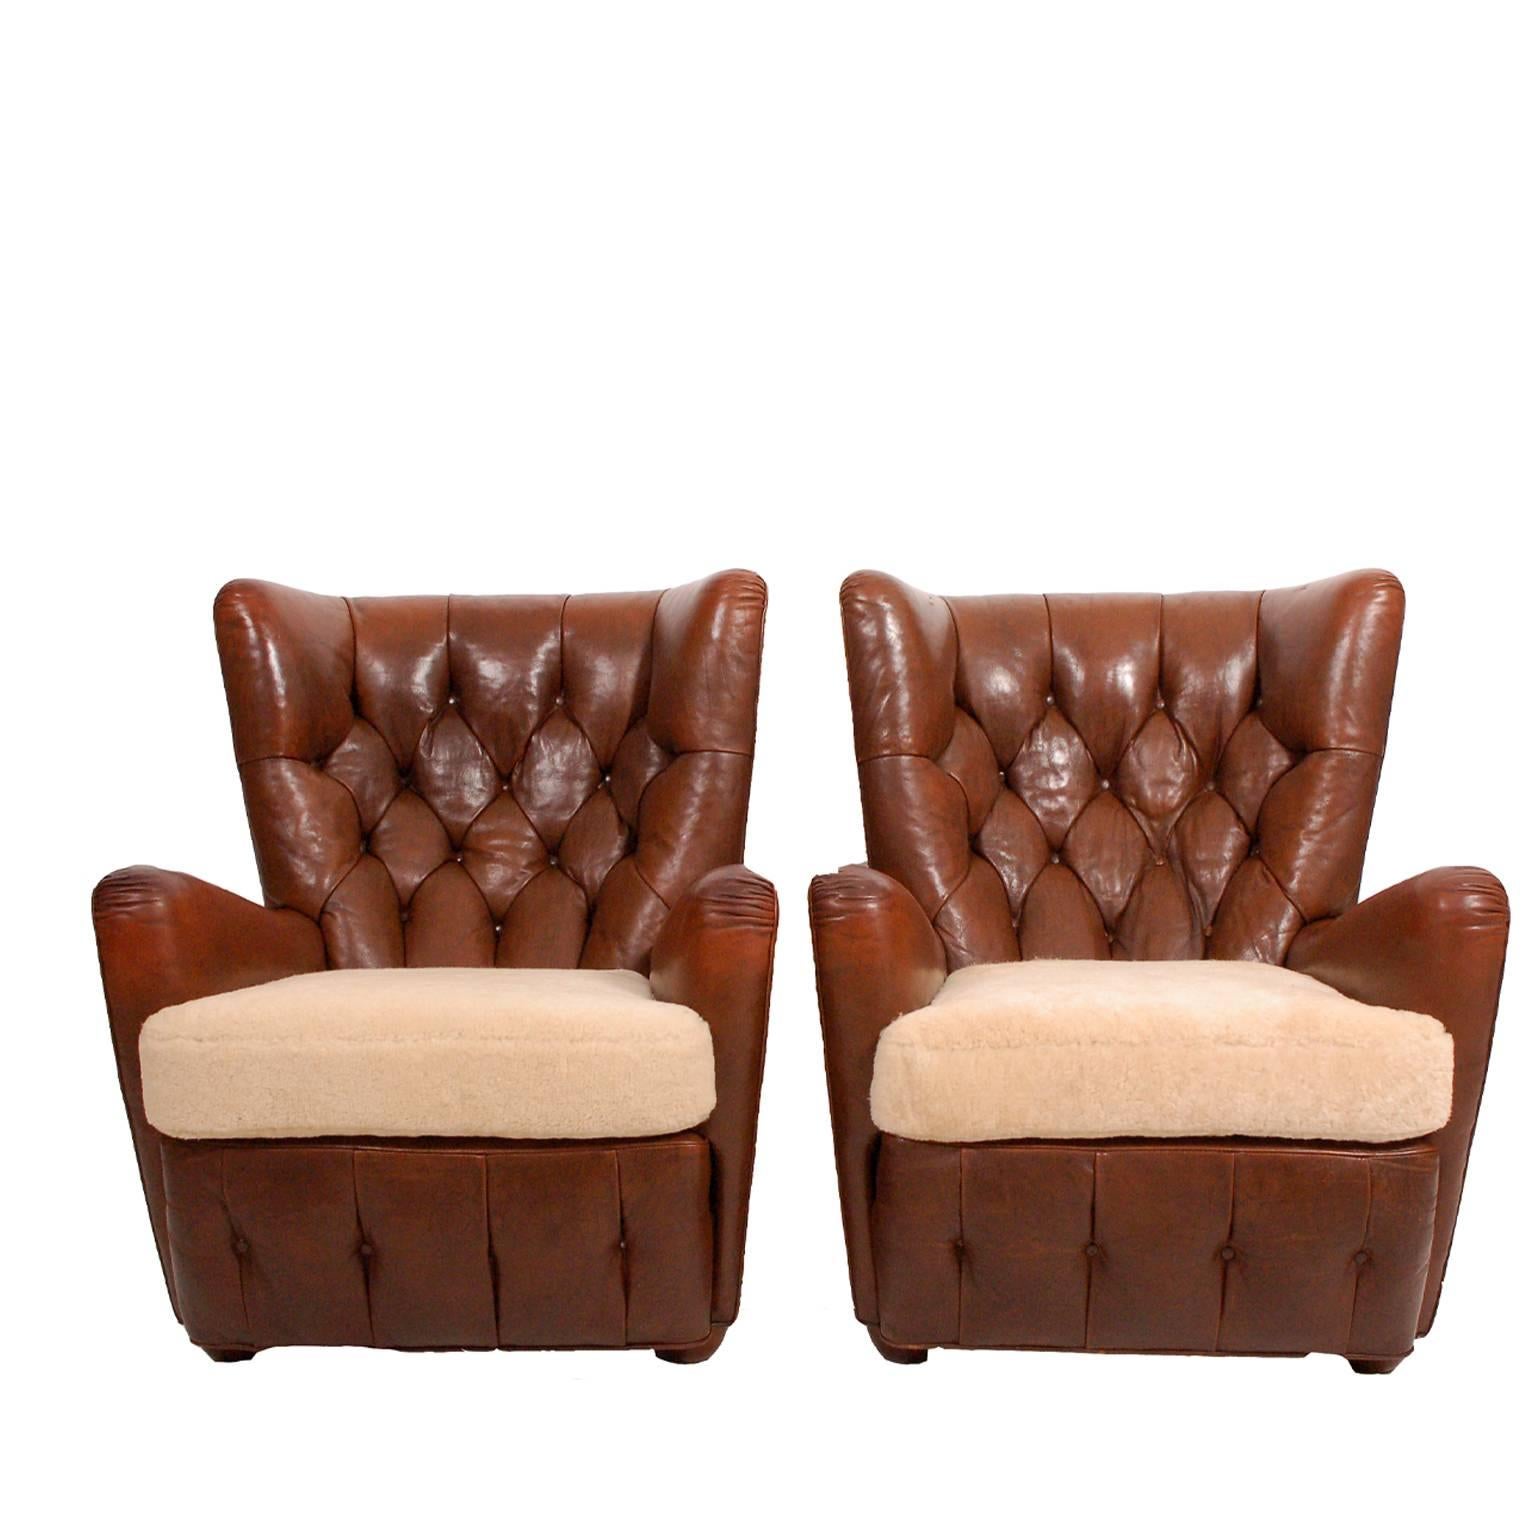 1920s Chesterfield high back leather easy chairs with button back and base, sheepskin seats and original brown leather. Brass nailhead trim to both. On beechwood feet. Sold as a pair only.